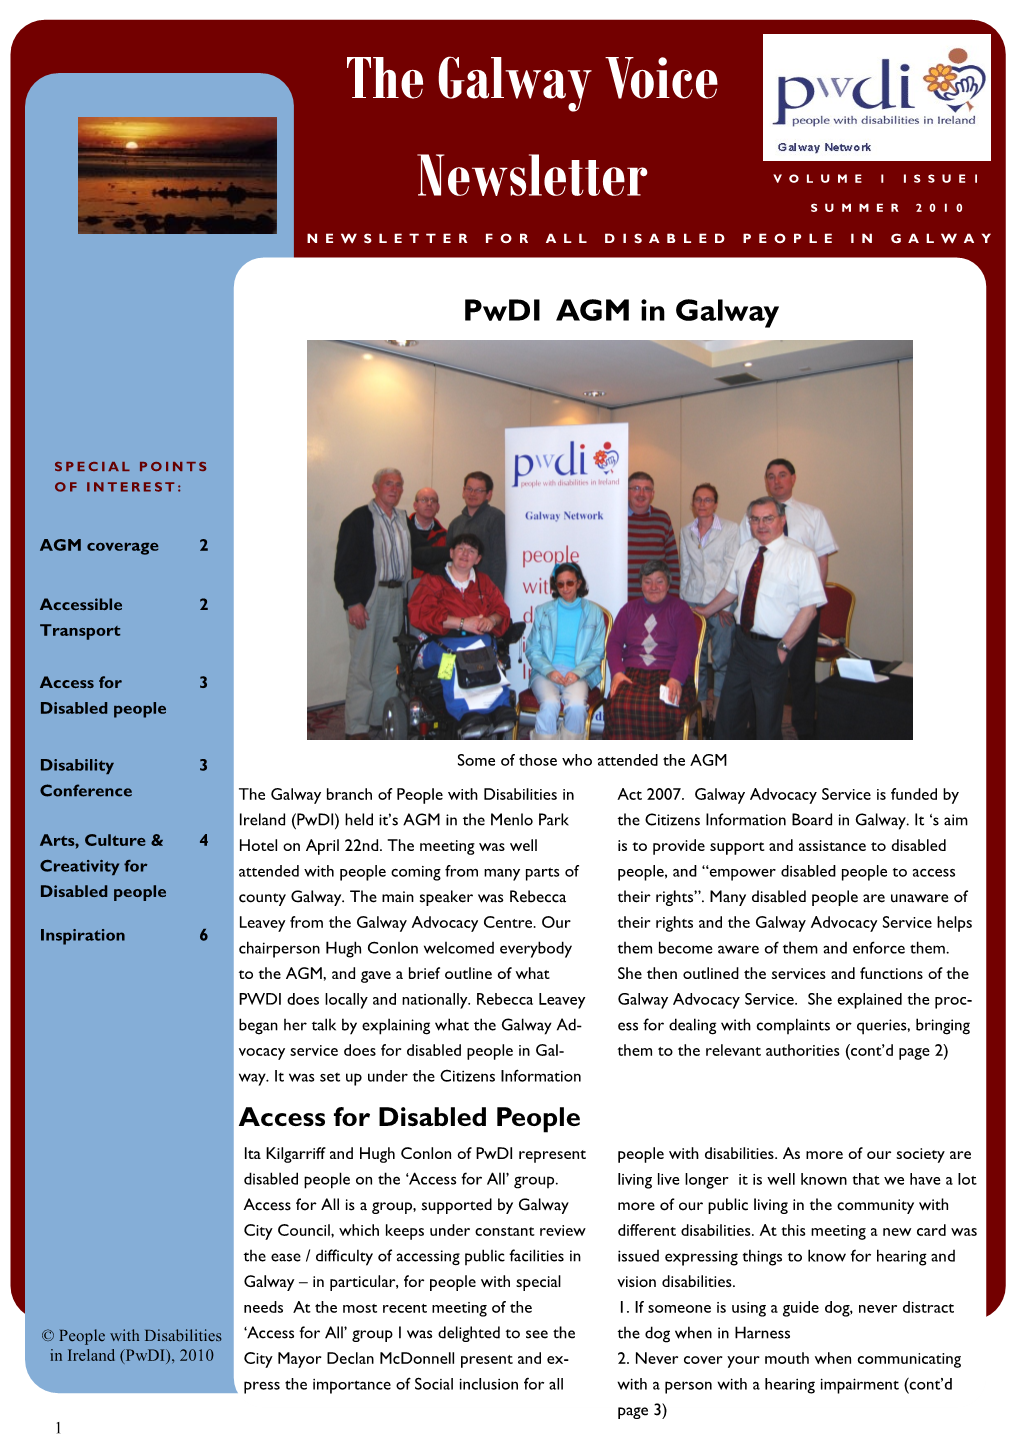 The Galway Voice Newsletter